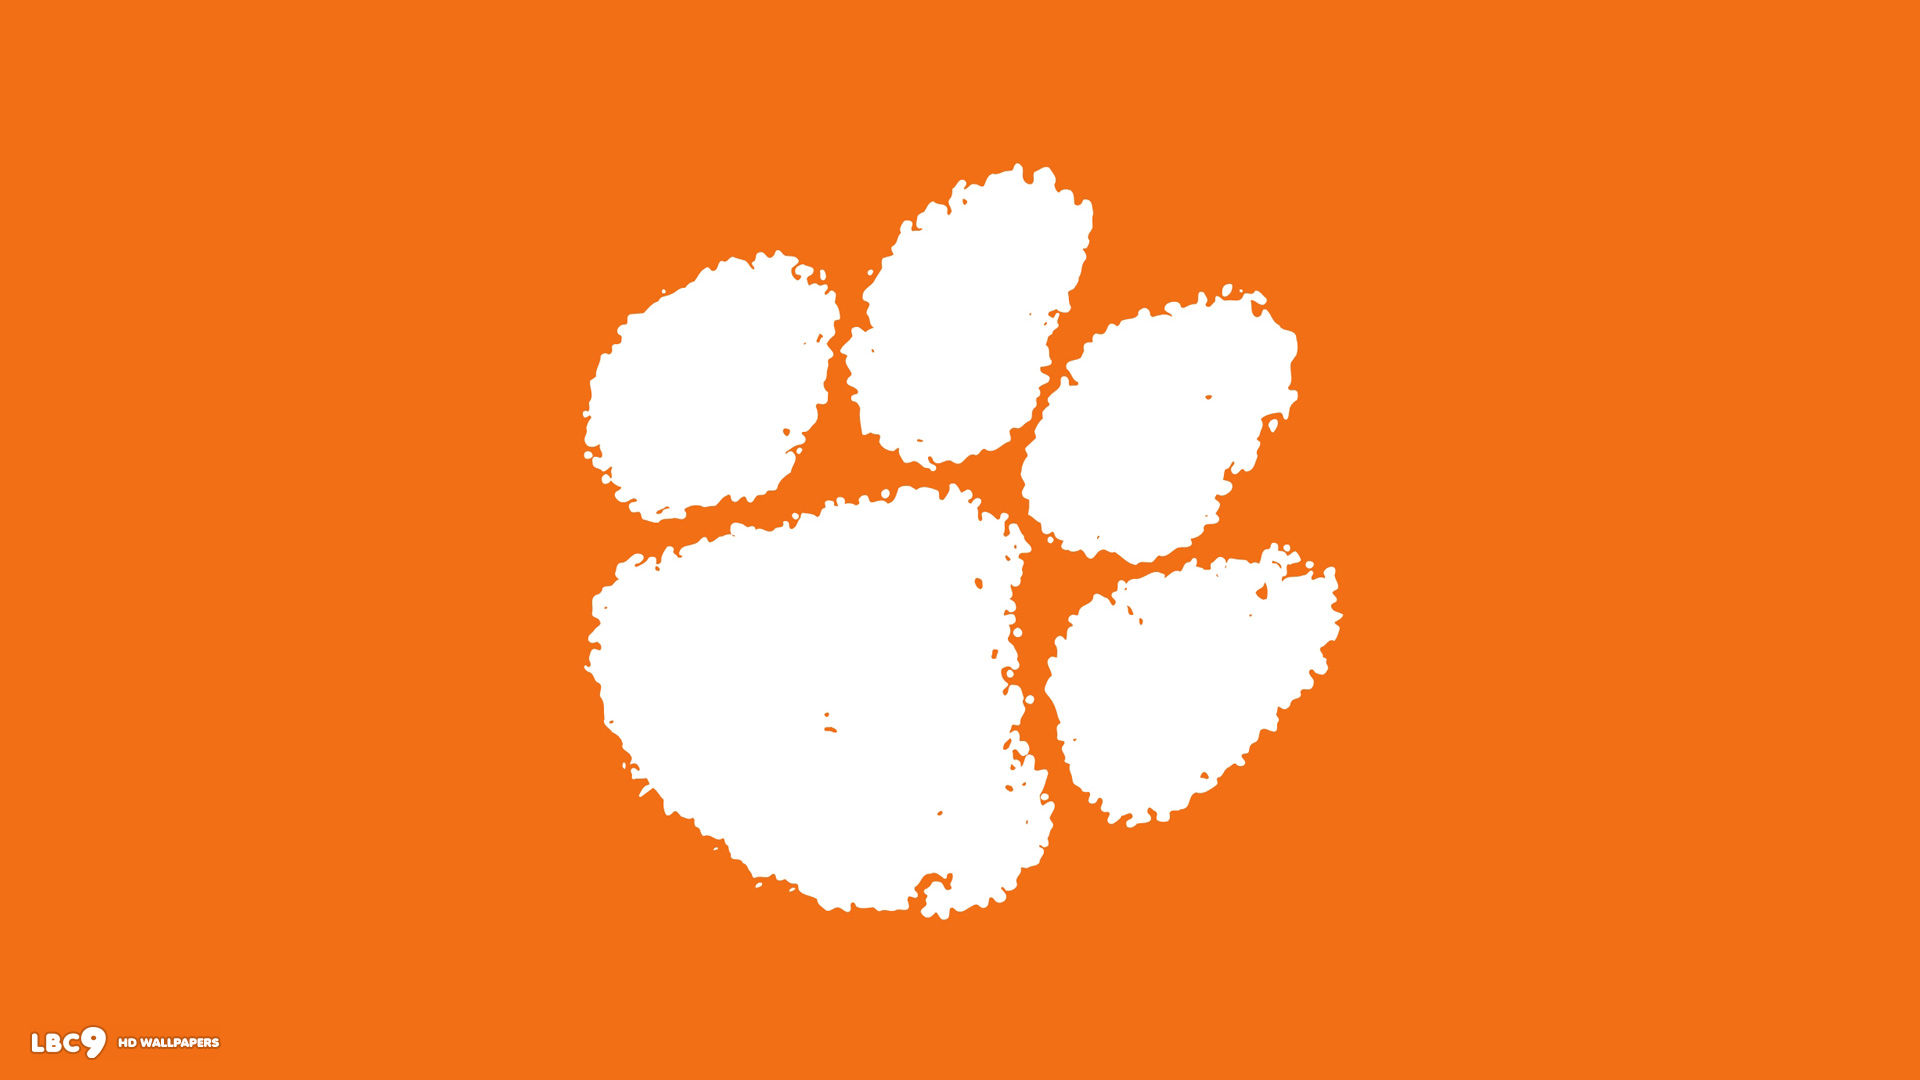 clemson tigers wallpaper images | cute Wallpapers